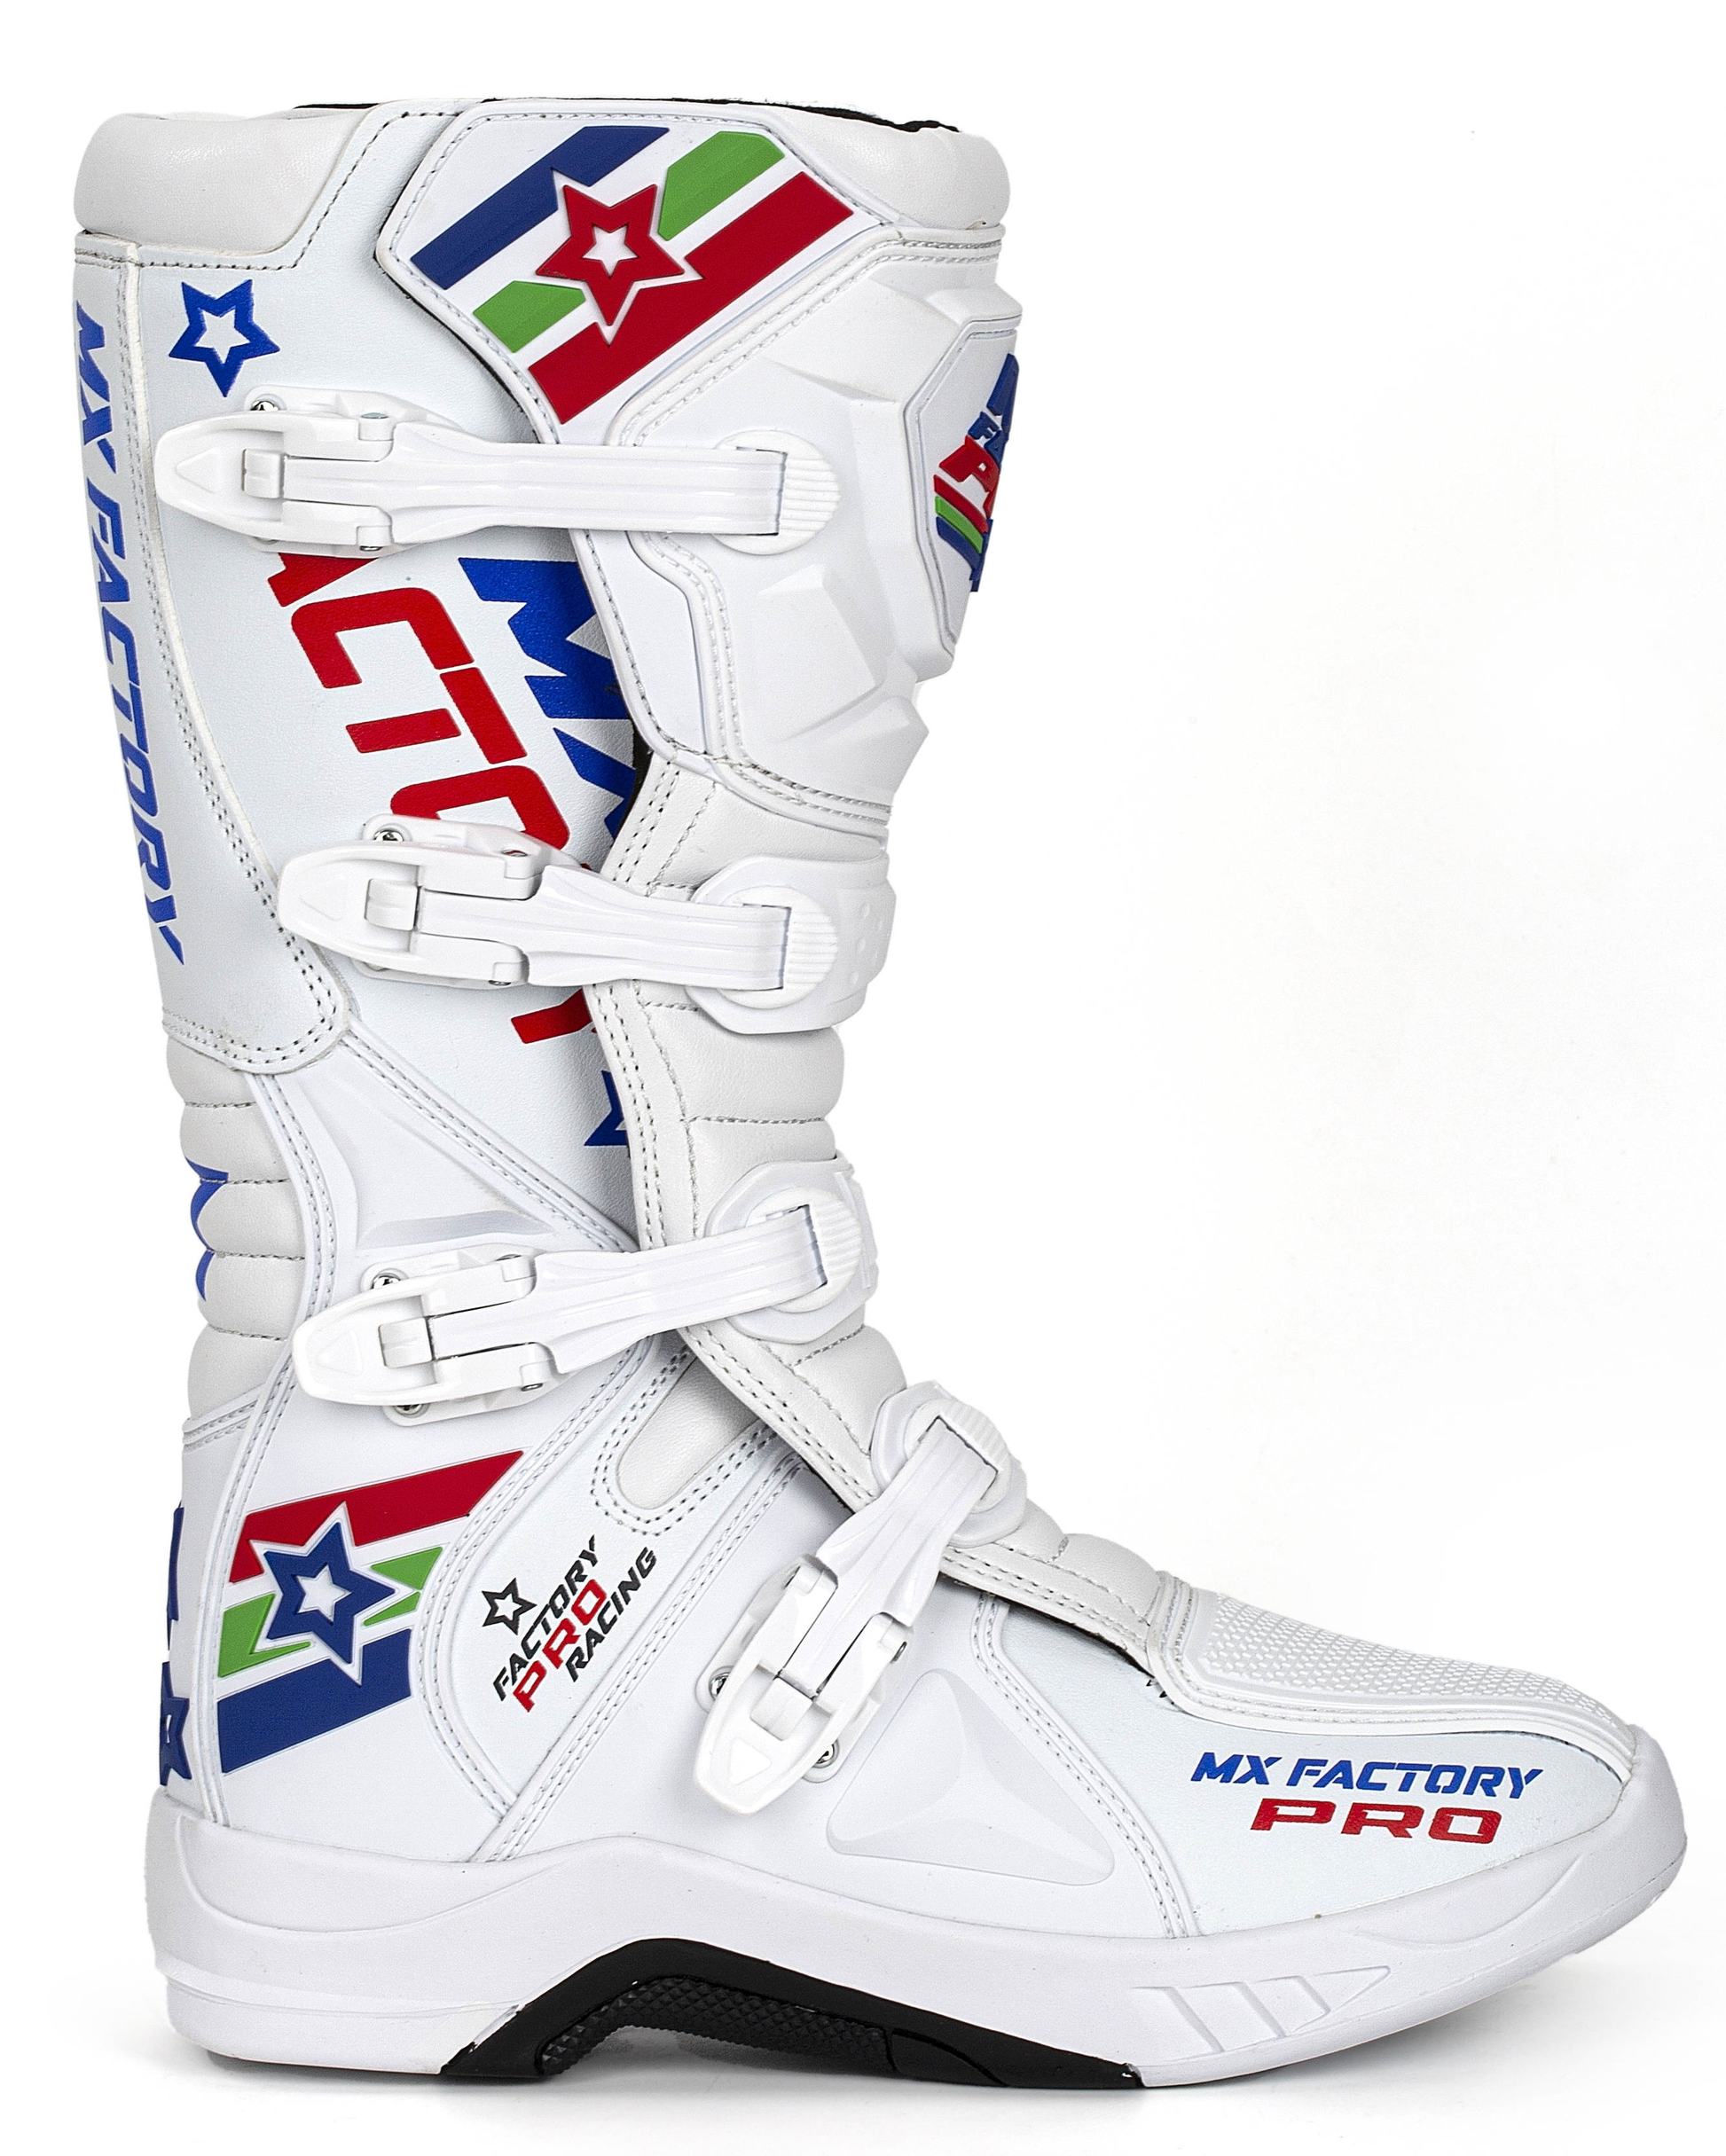 MX FACTORY PRO WHITE BOOTS LIMITED EDITION 2